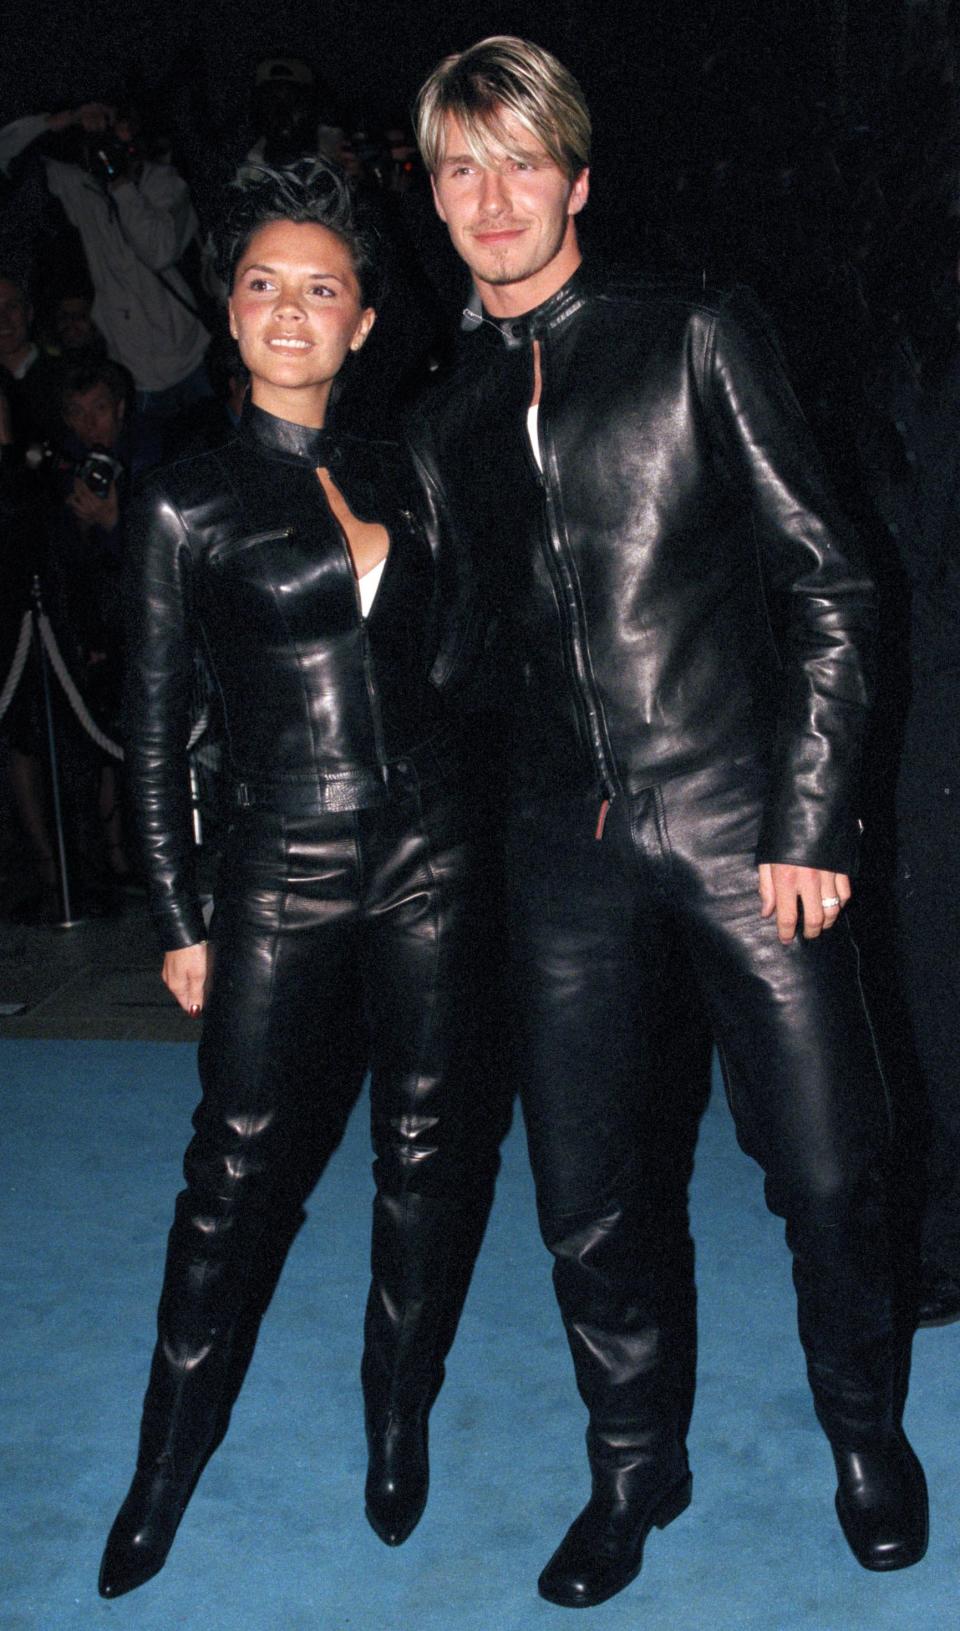 Victoria and David Beckham never fail to impress us with their sharp sense of style, but there was a time way back in the day when they made some&nbsp;questionable choices. Yes, this photo does show the two of them wearing matching head-to-toe leather at a Versace Club party in London in 1999. You're welcome.